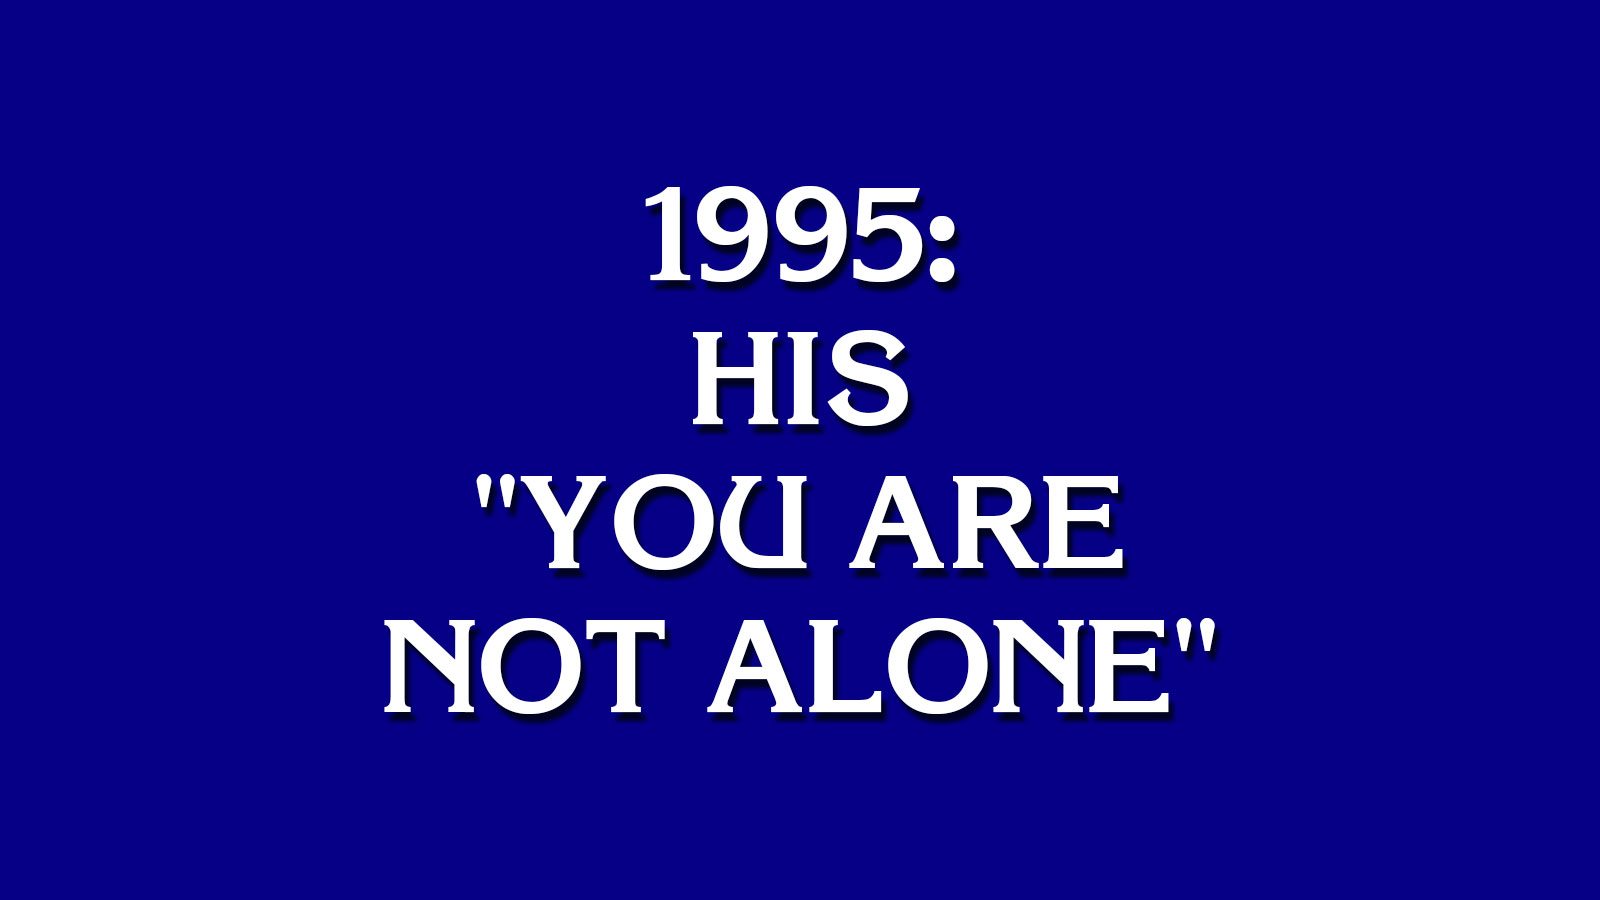 Can You Go on “Jeopardy!”? 43